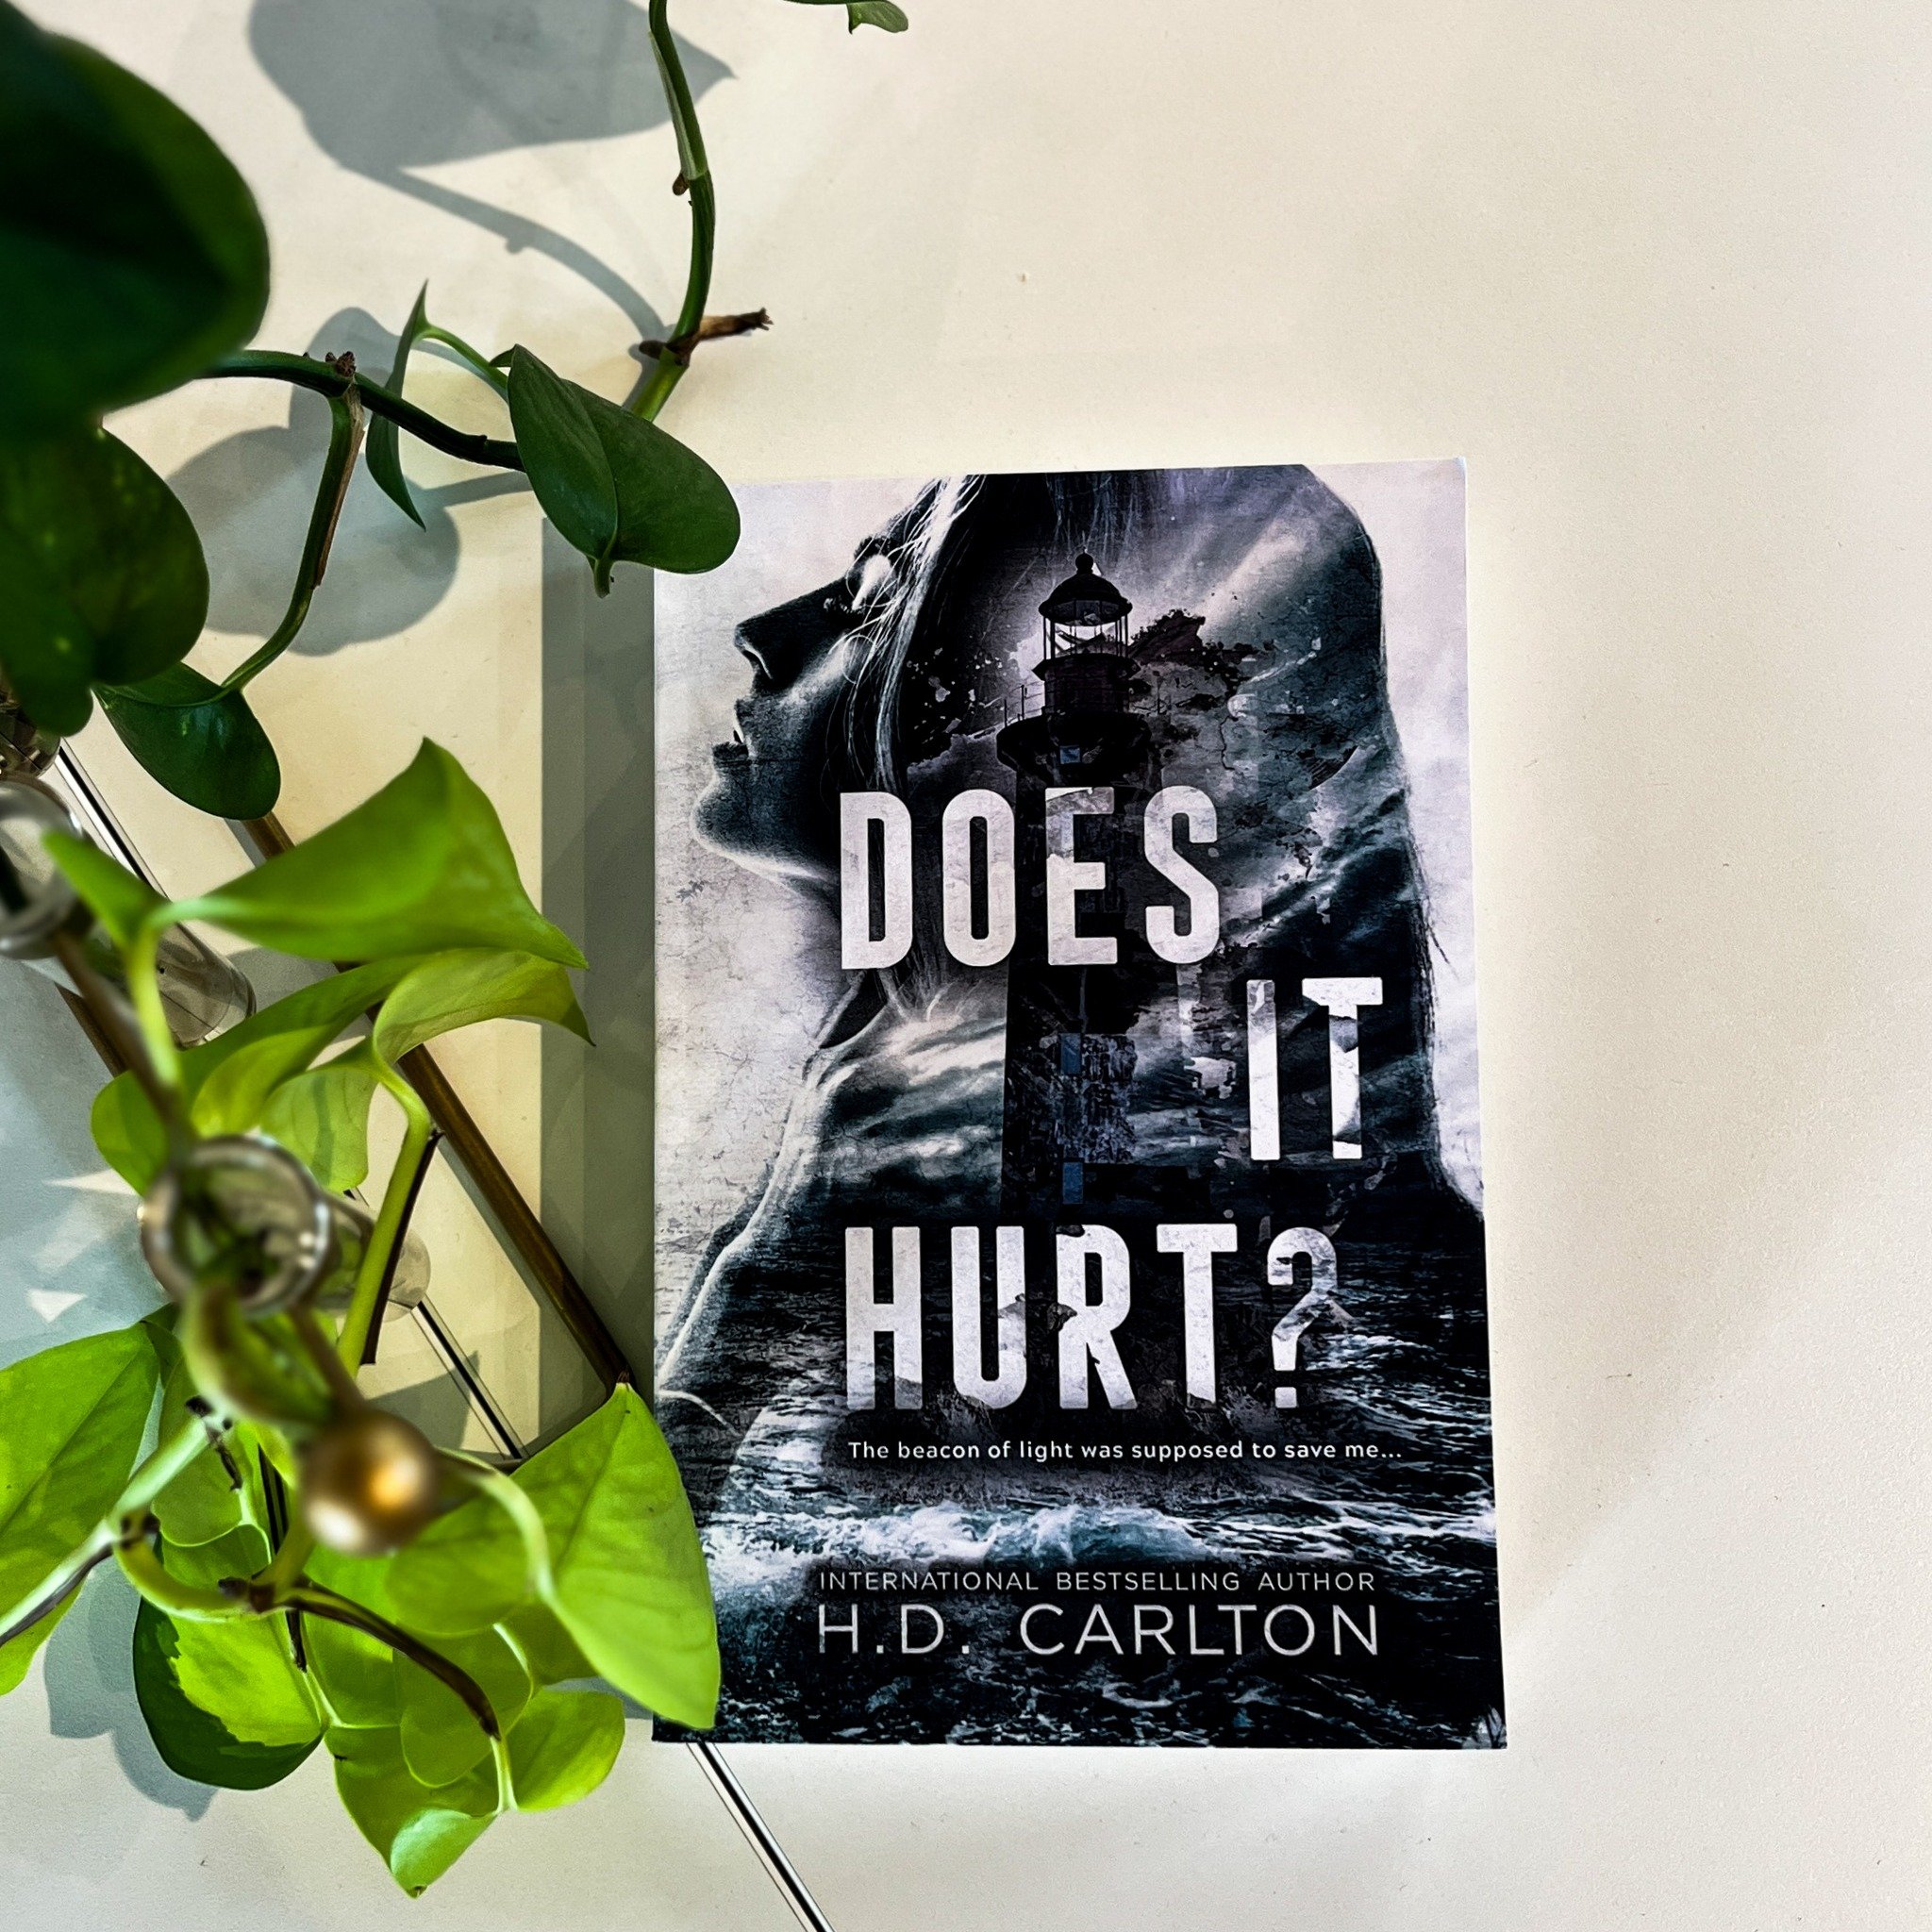 Good morning book friends! For this Wednesday's installment of Verb's Voices we are finding out what Haley has been reading!

&quot;I read &ldquo;does it hurt&rdquo; by H.D. Carlton and it was wild. This book was one that many customers have suggeste